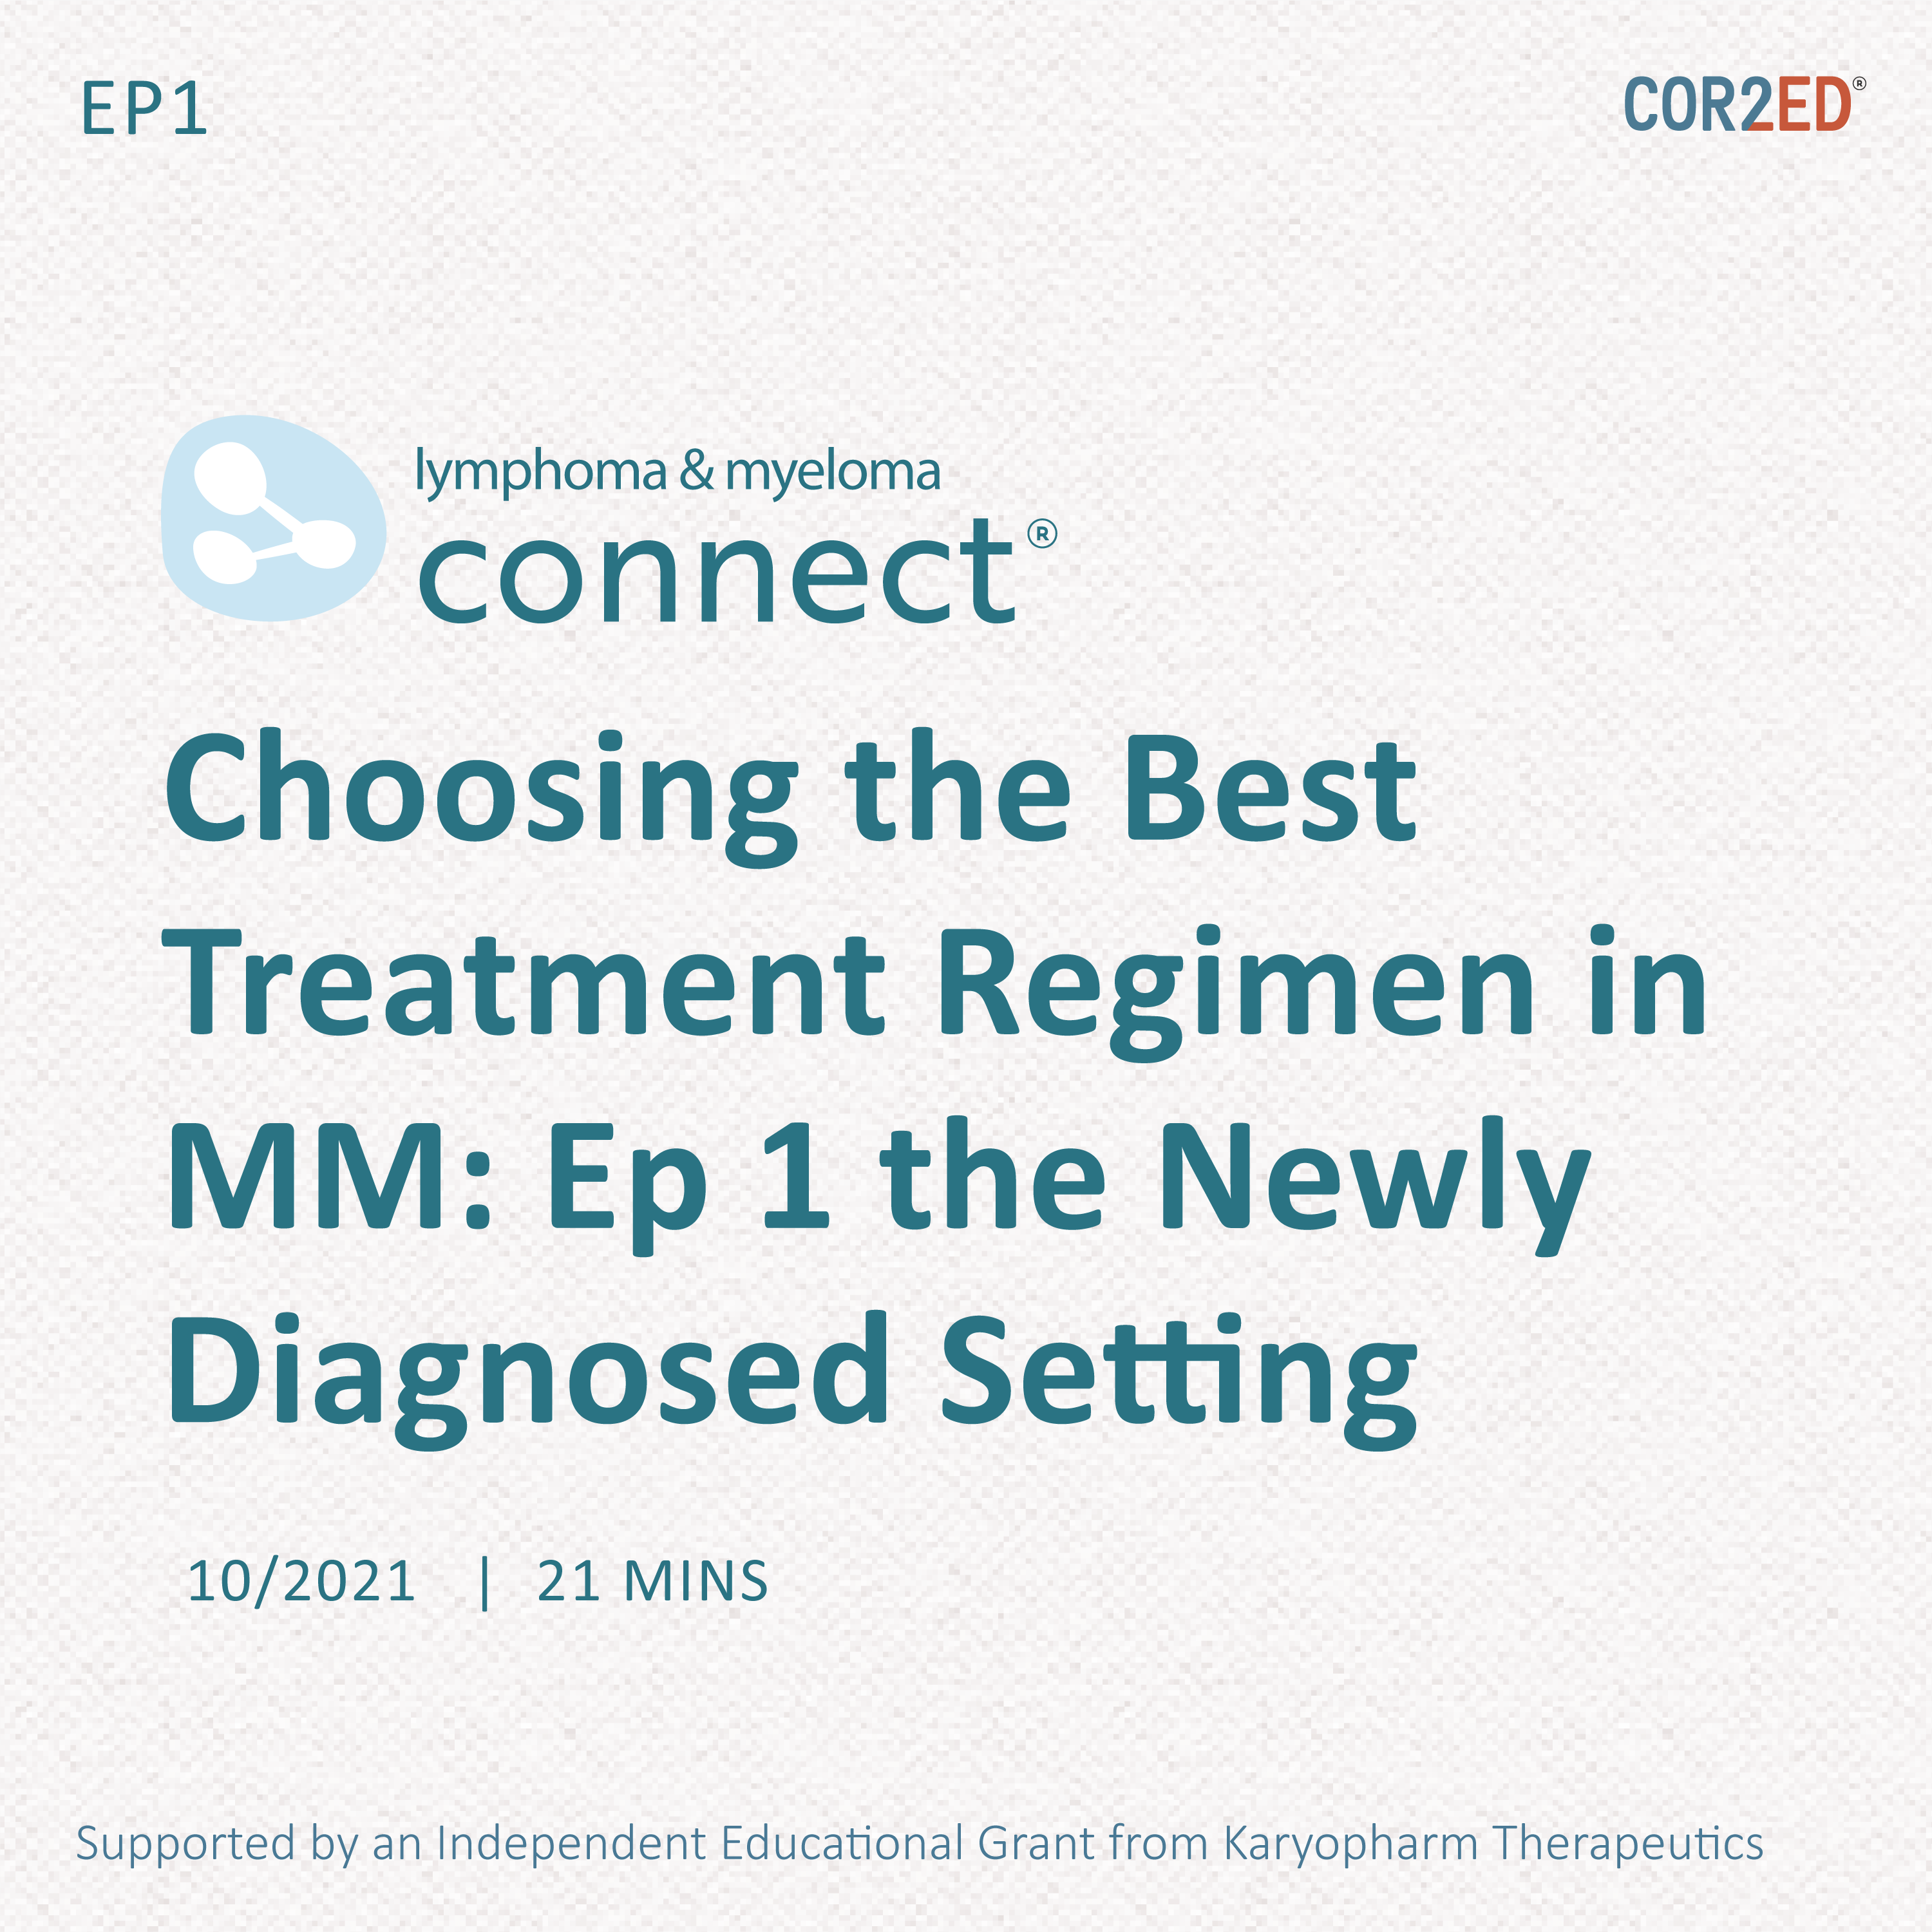 Choosing the Best Treatment Regimen in Multiple Myeloma: Episode 1 - the Newly Diagnosed Setting 